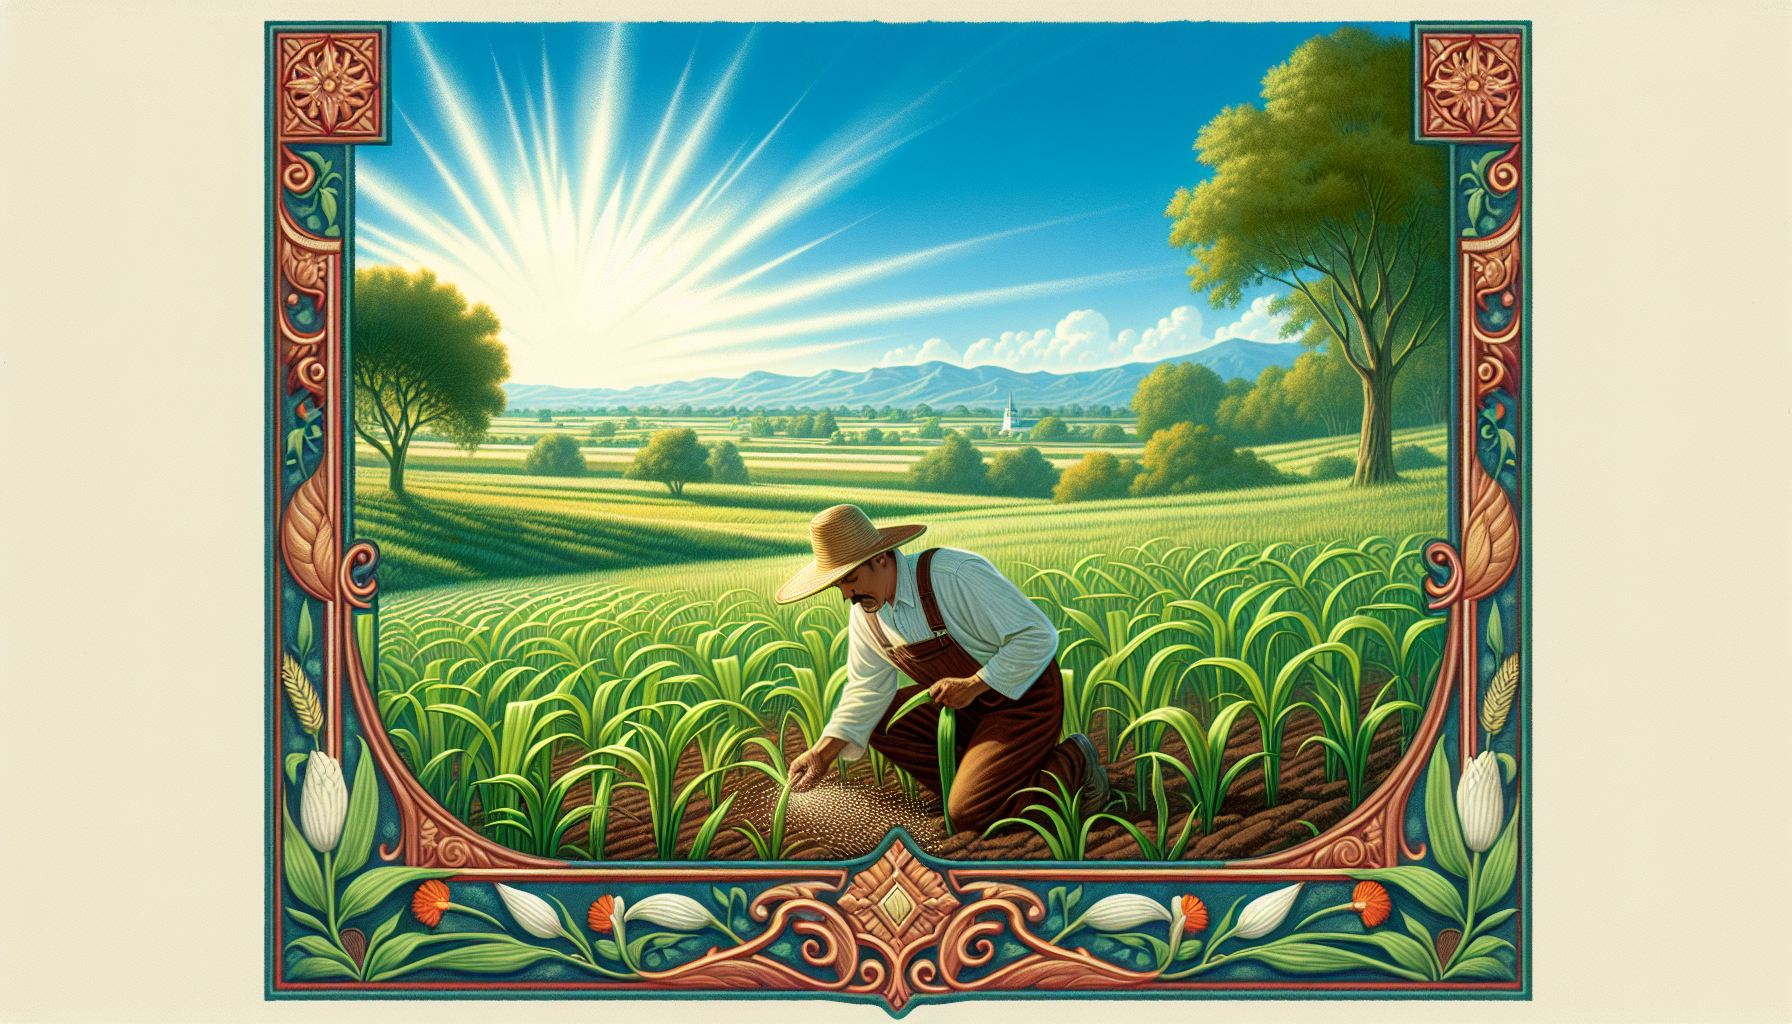 A serene pastoral scene depicting a farmer sowing seeds in a fertile field under a bright, clear sky, symbolizing diligence and hope, with a soft overlay of the scripture from Galatians 6:7-9 in elega